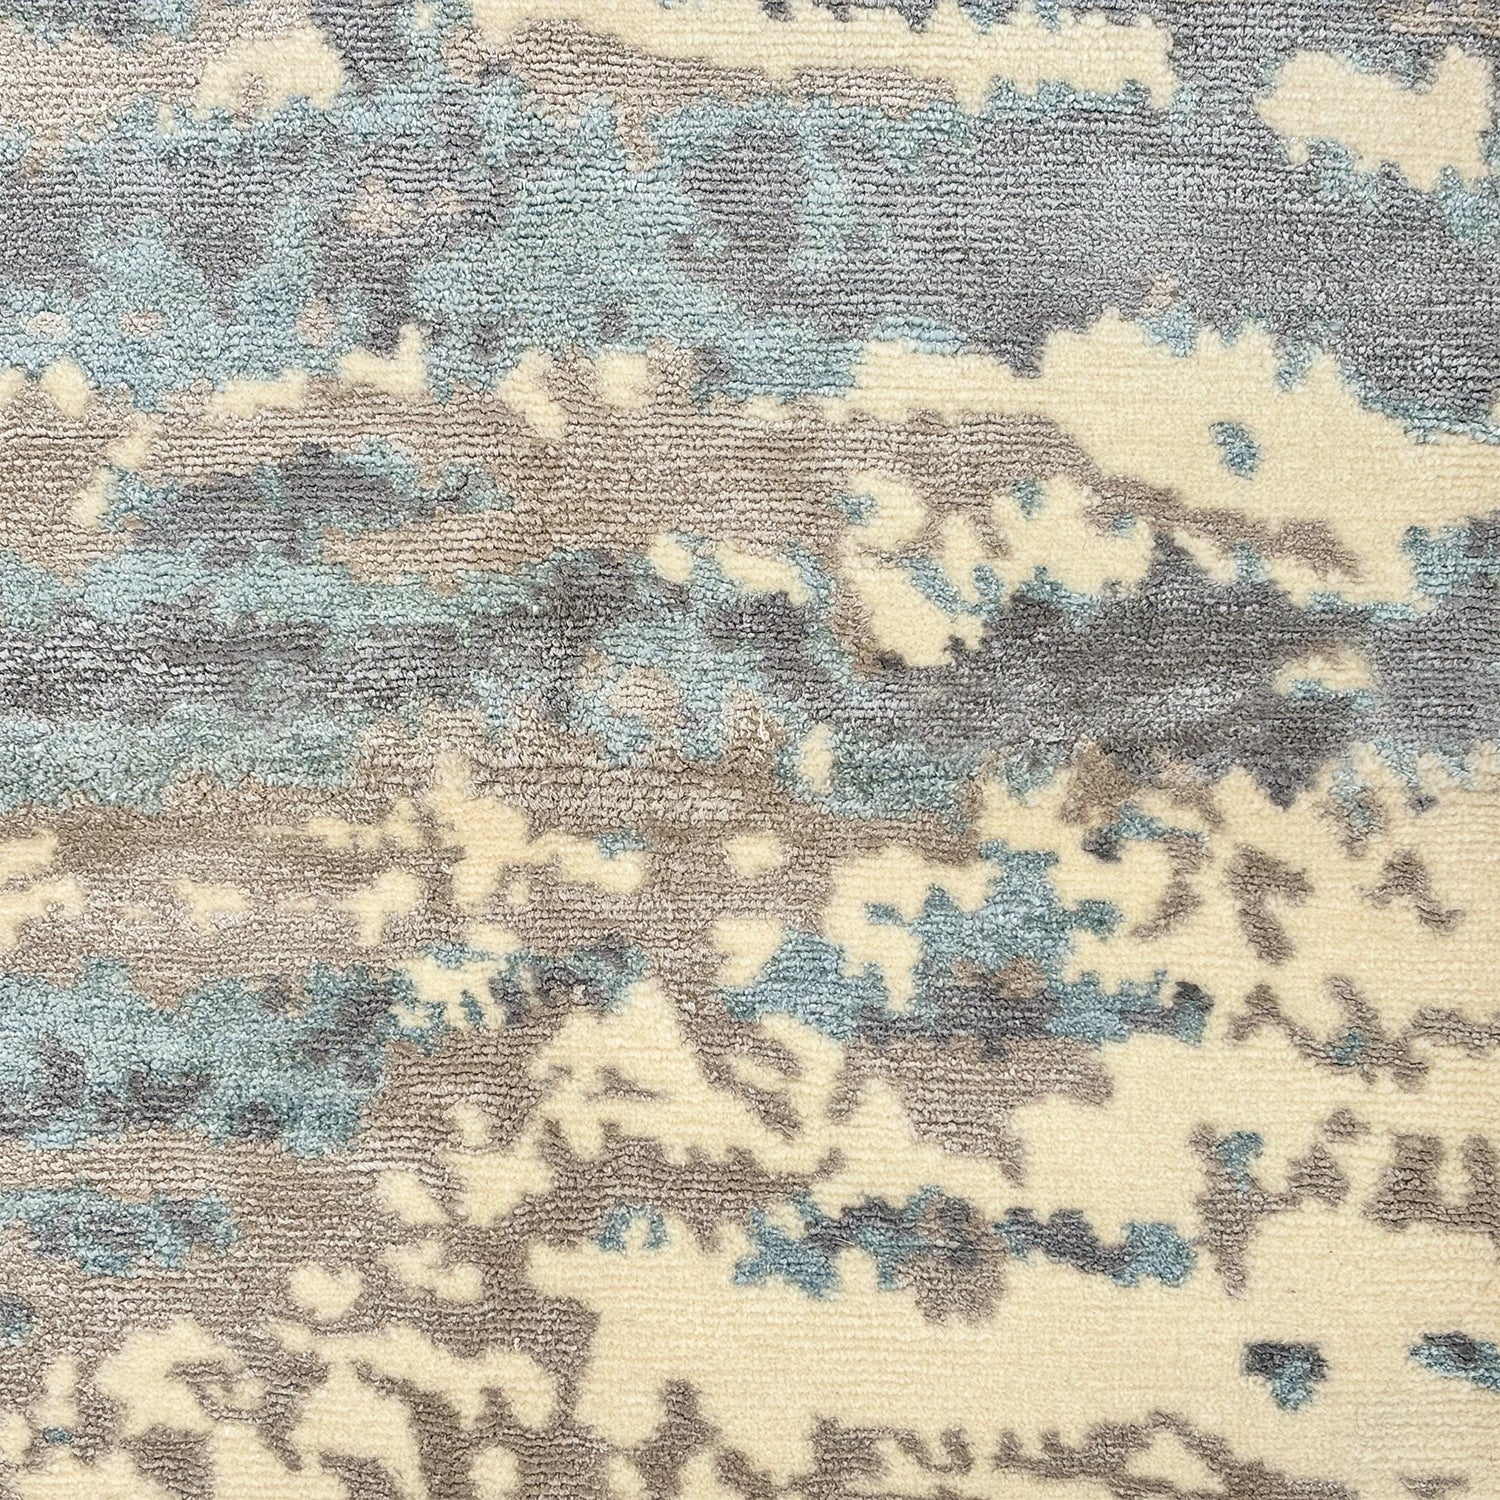 Detail of a woolblend rug in grey, cream and acqua in an abstract textural pattern.